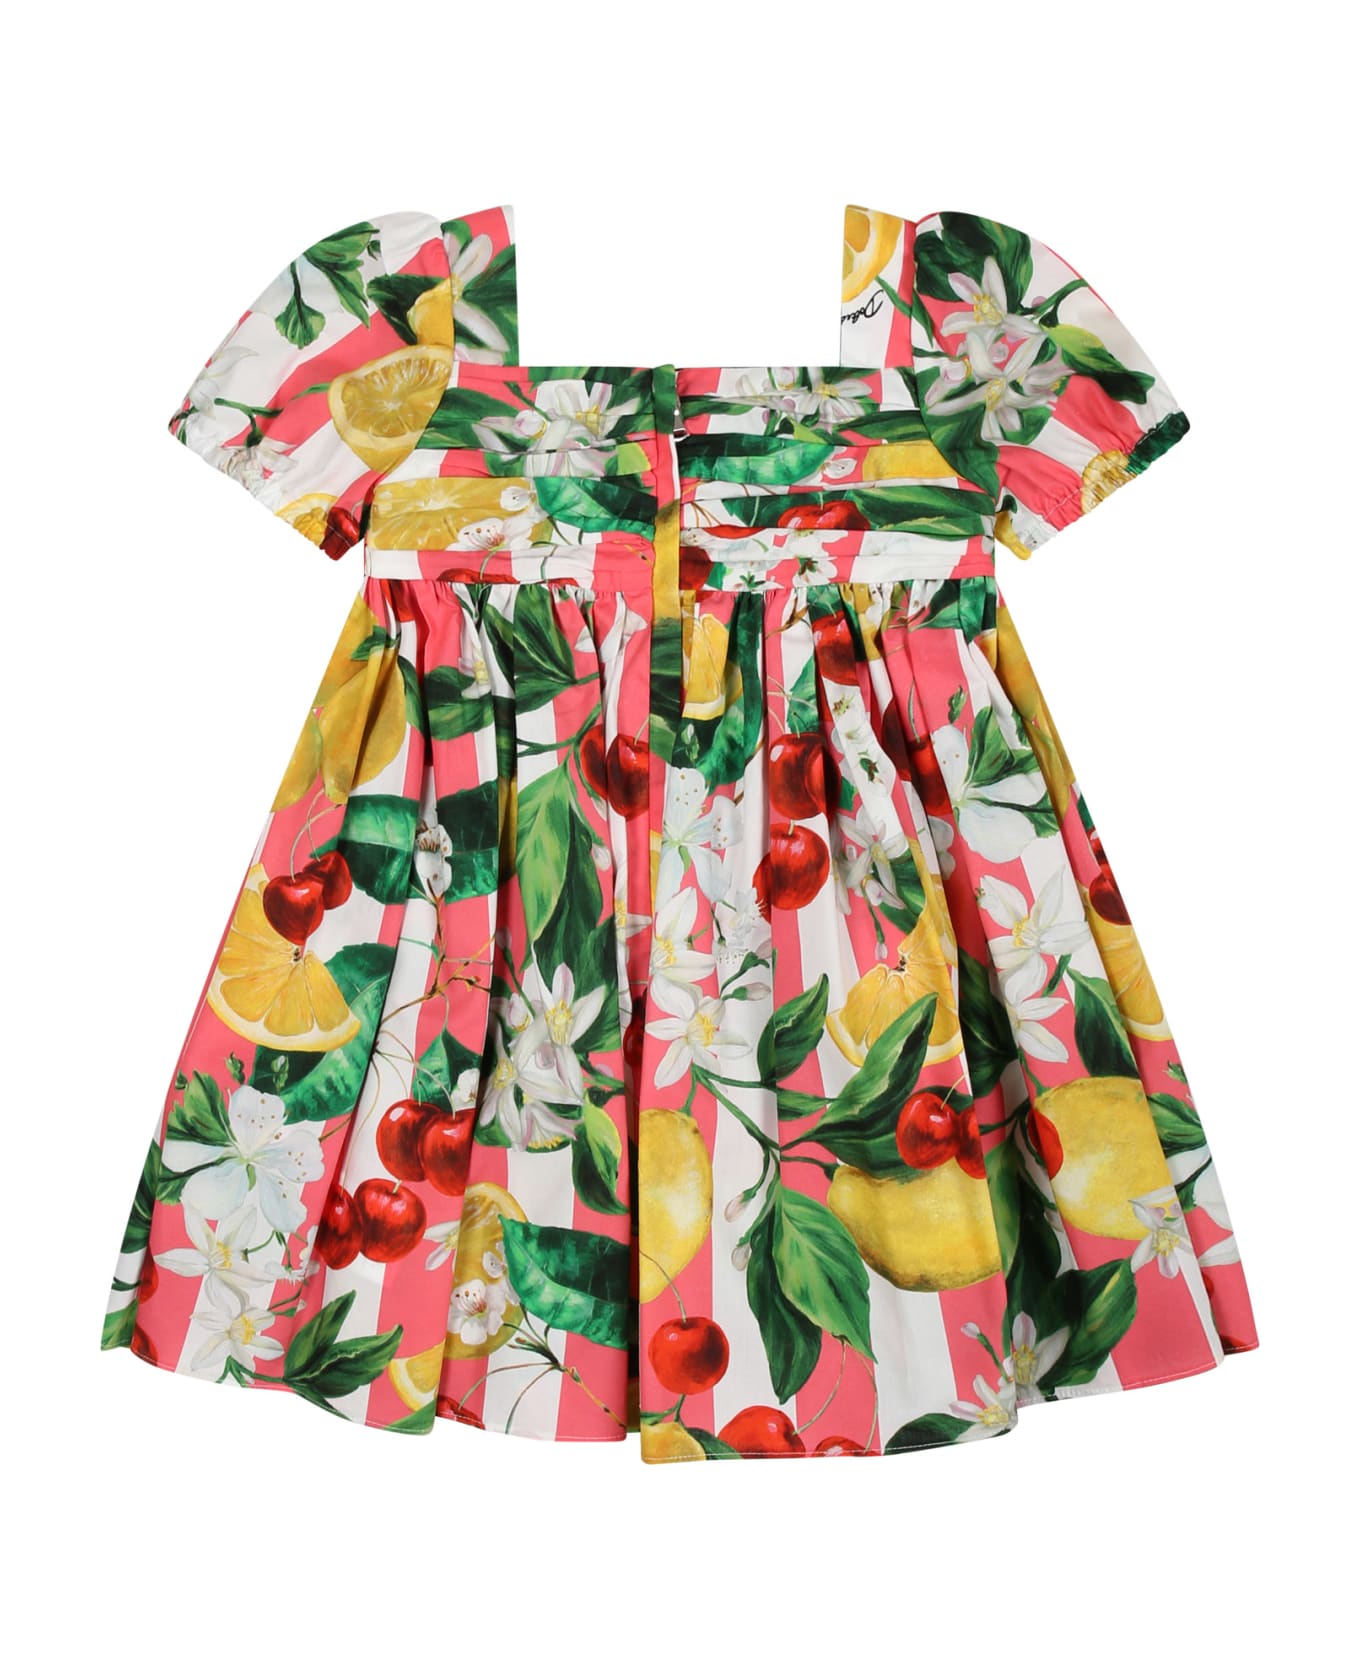 Dolce & Gabbana Multicolor Dress For Baby Girl With All-over Flowers And Fruits - Multicolor ウェア